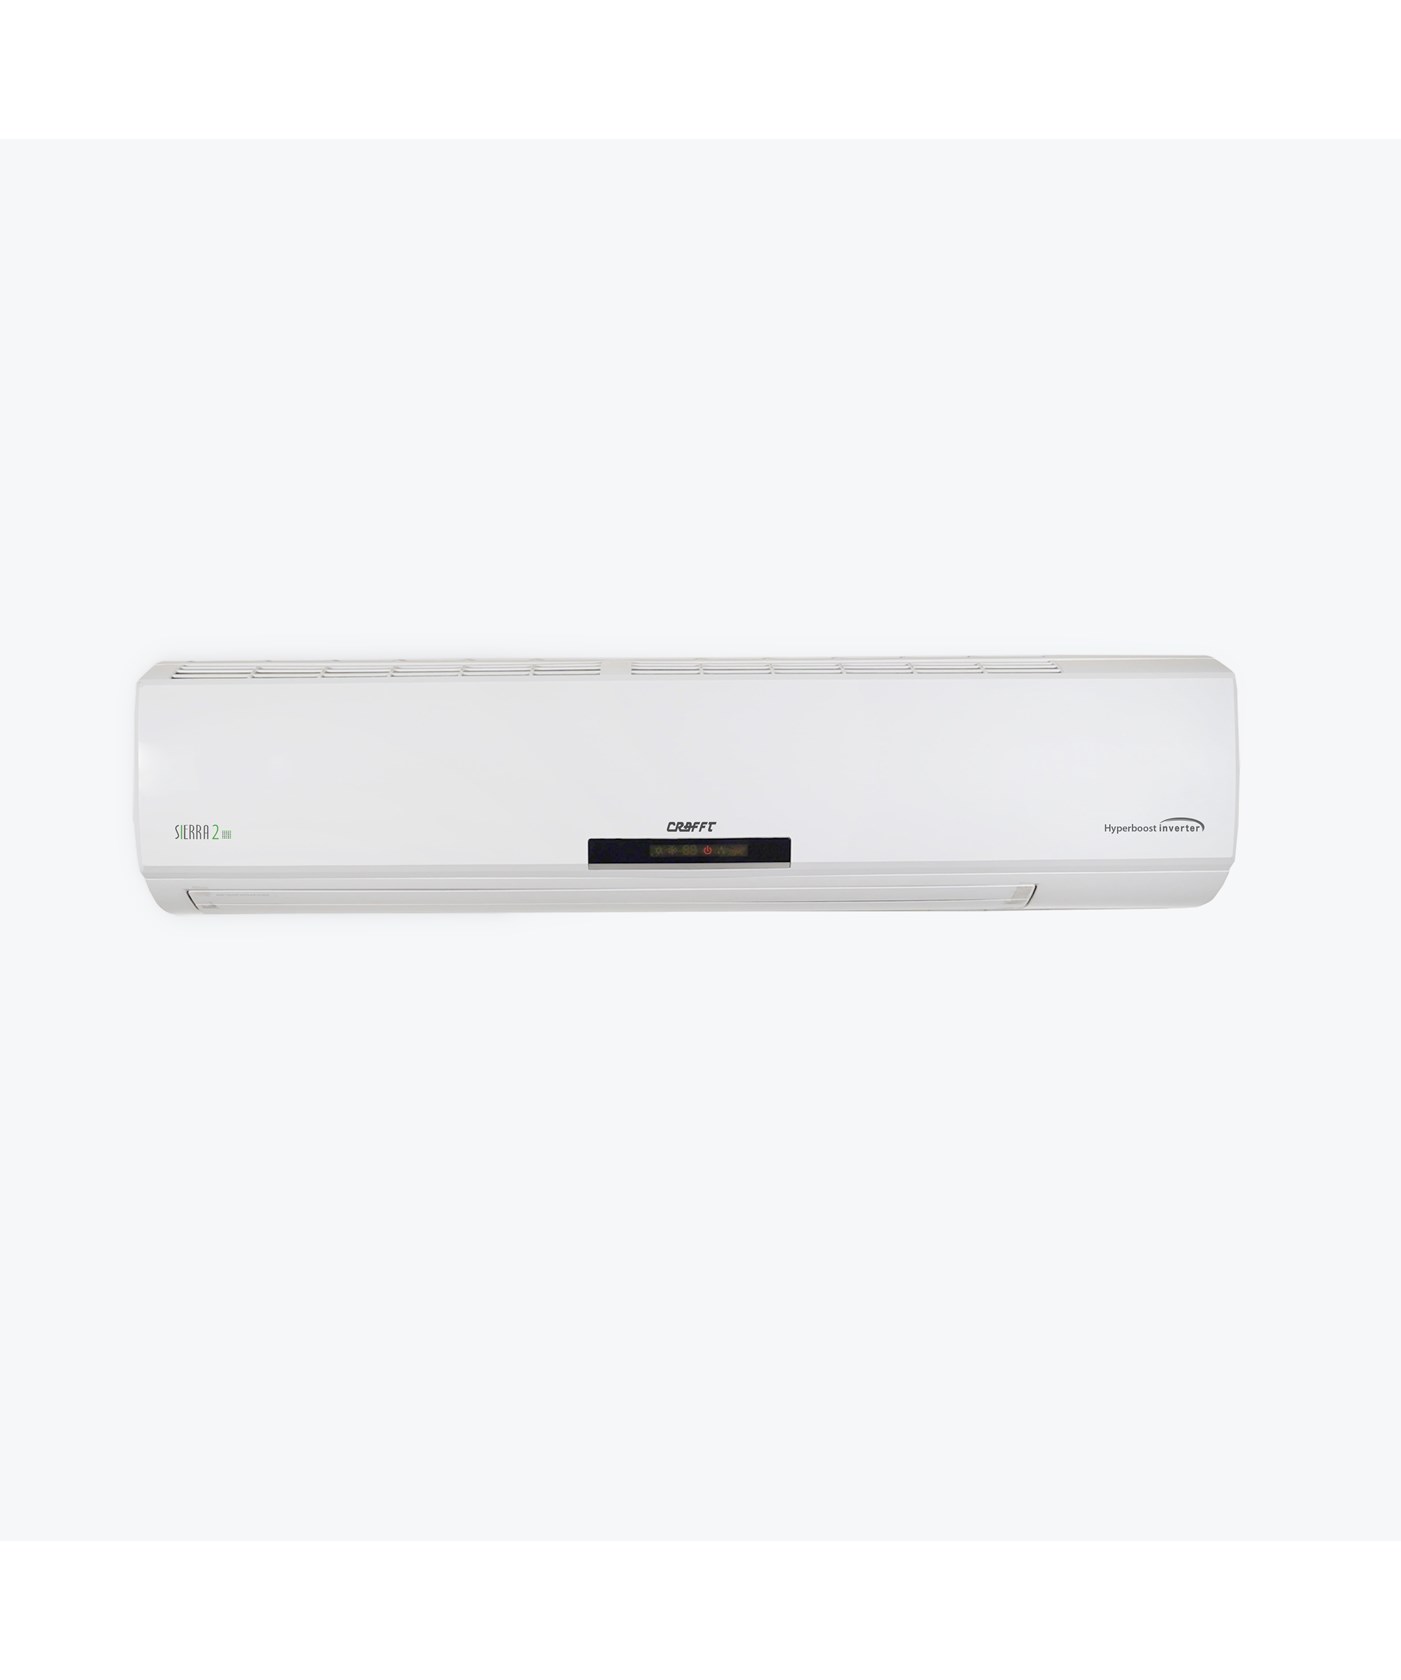 Wall Split 3 Ton inverter hyper boost||Air Conditioners 